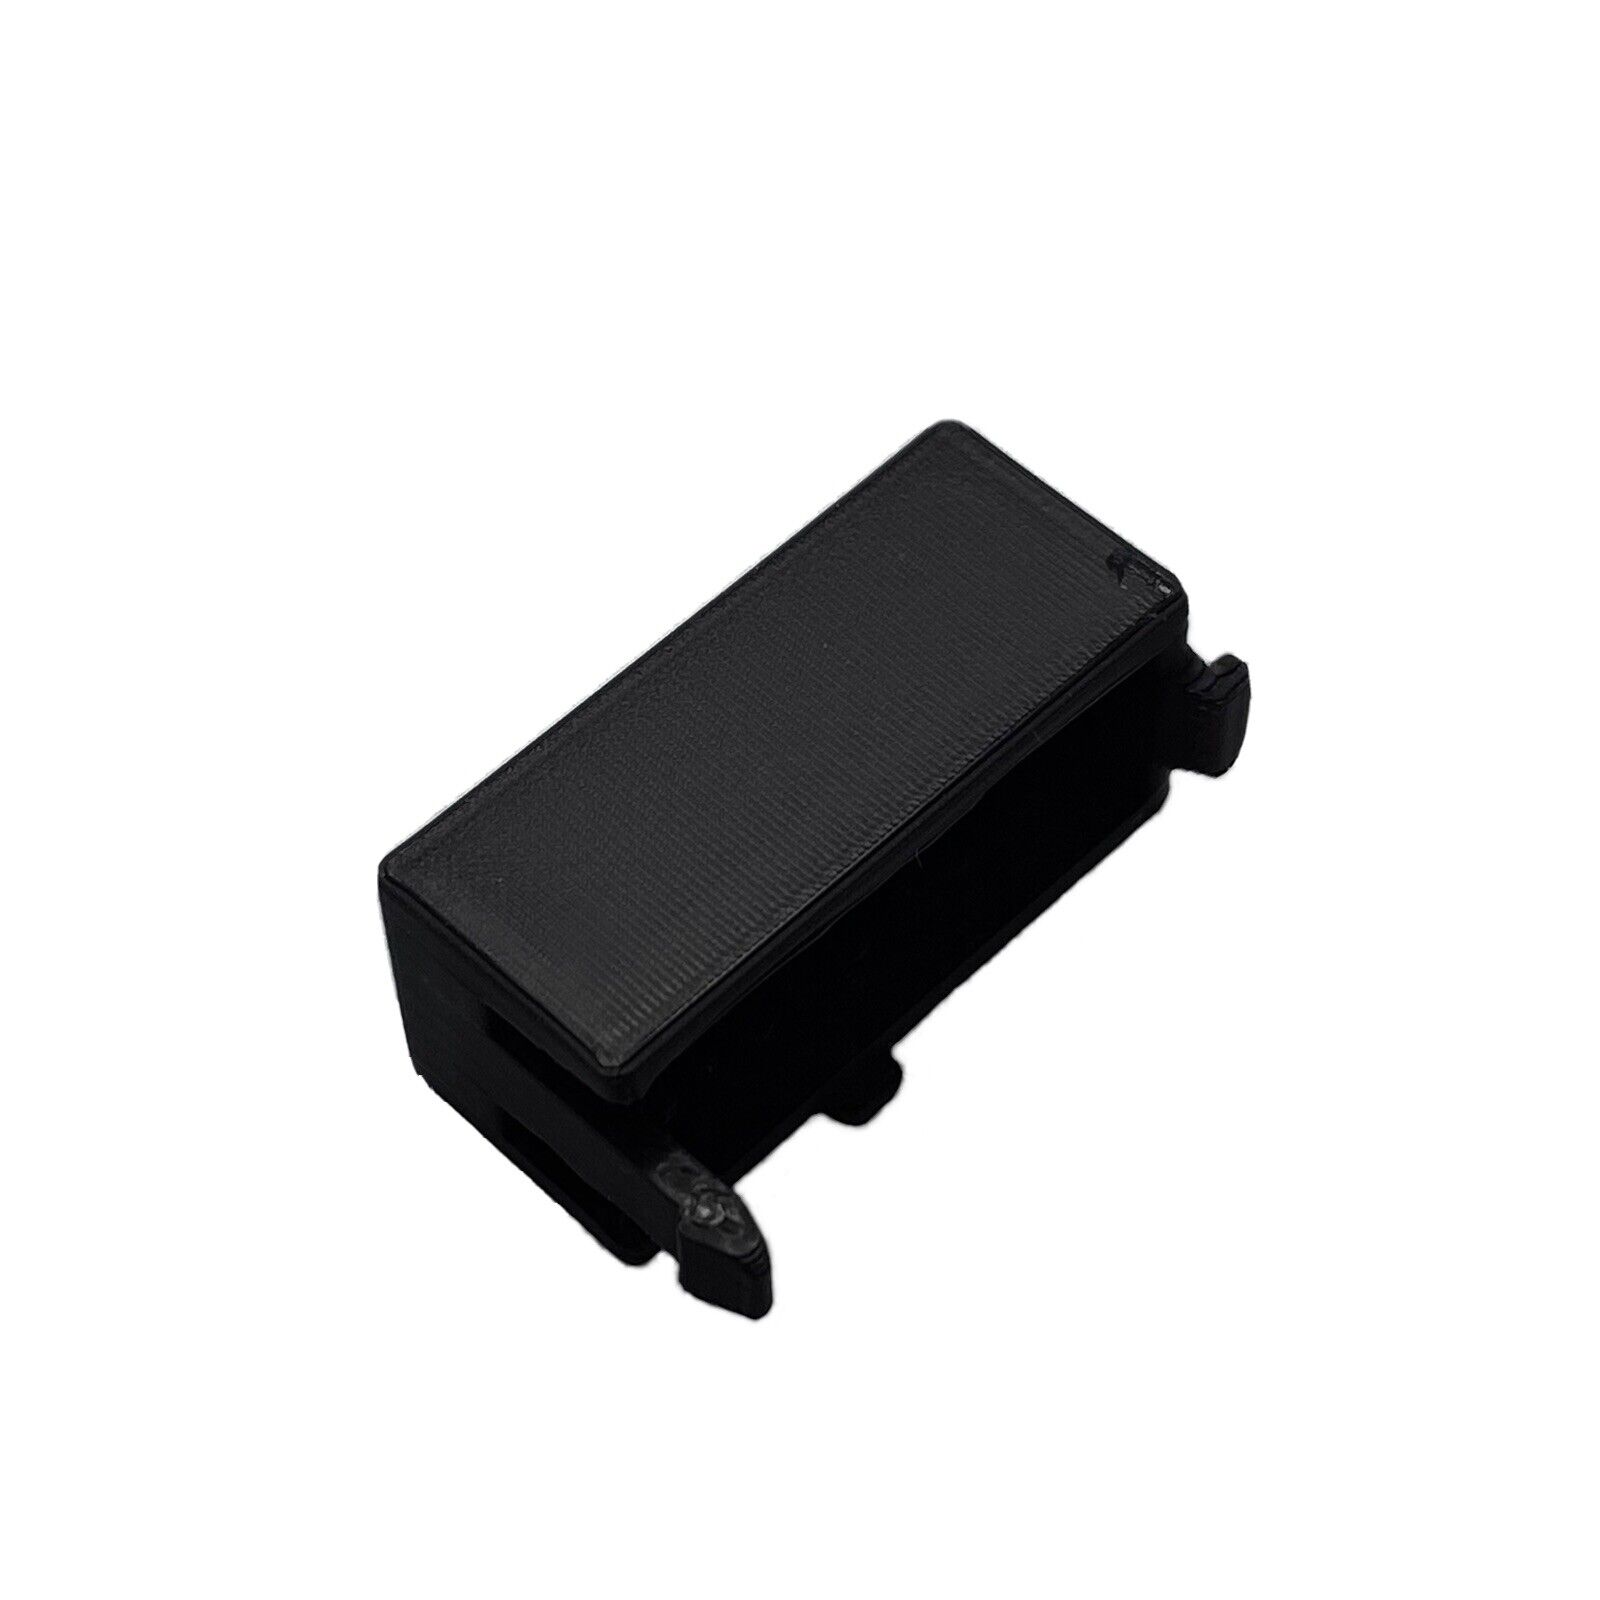 HP WiFi Antenna Cover Replacement for 600 G5 Mini PC